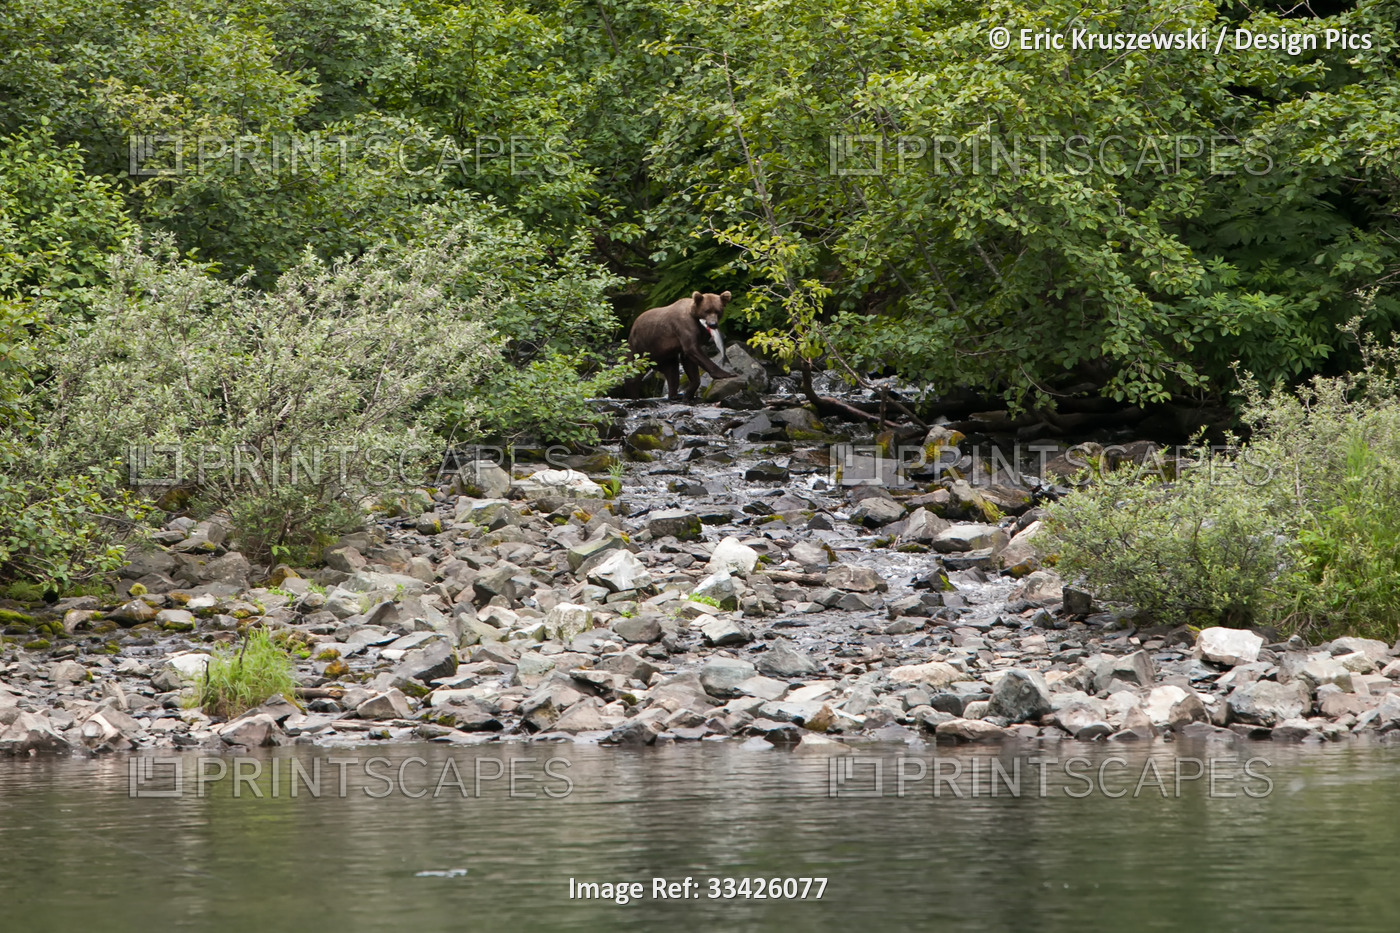 An Alaskan brown grizzly bear carries a fish in its mouth as it walks through ...